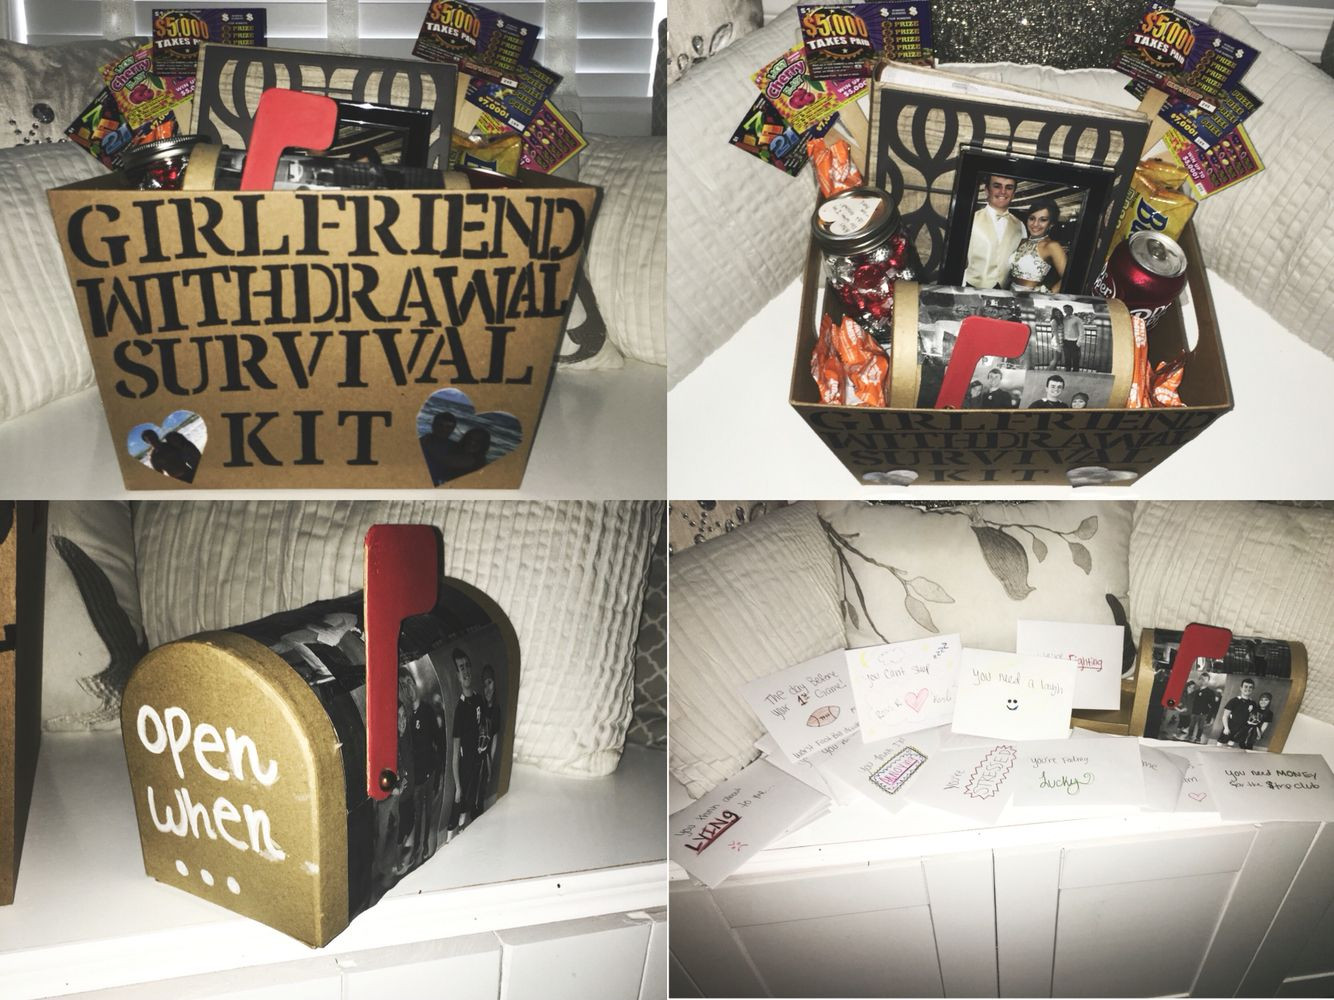 Gift Ideas To Get Your Girlfriend
 Girlfriend withdrawal survival kit and open when letters